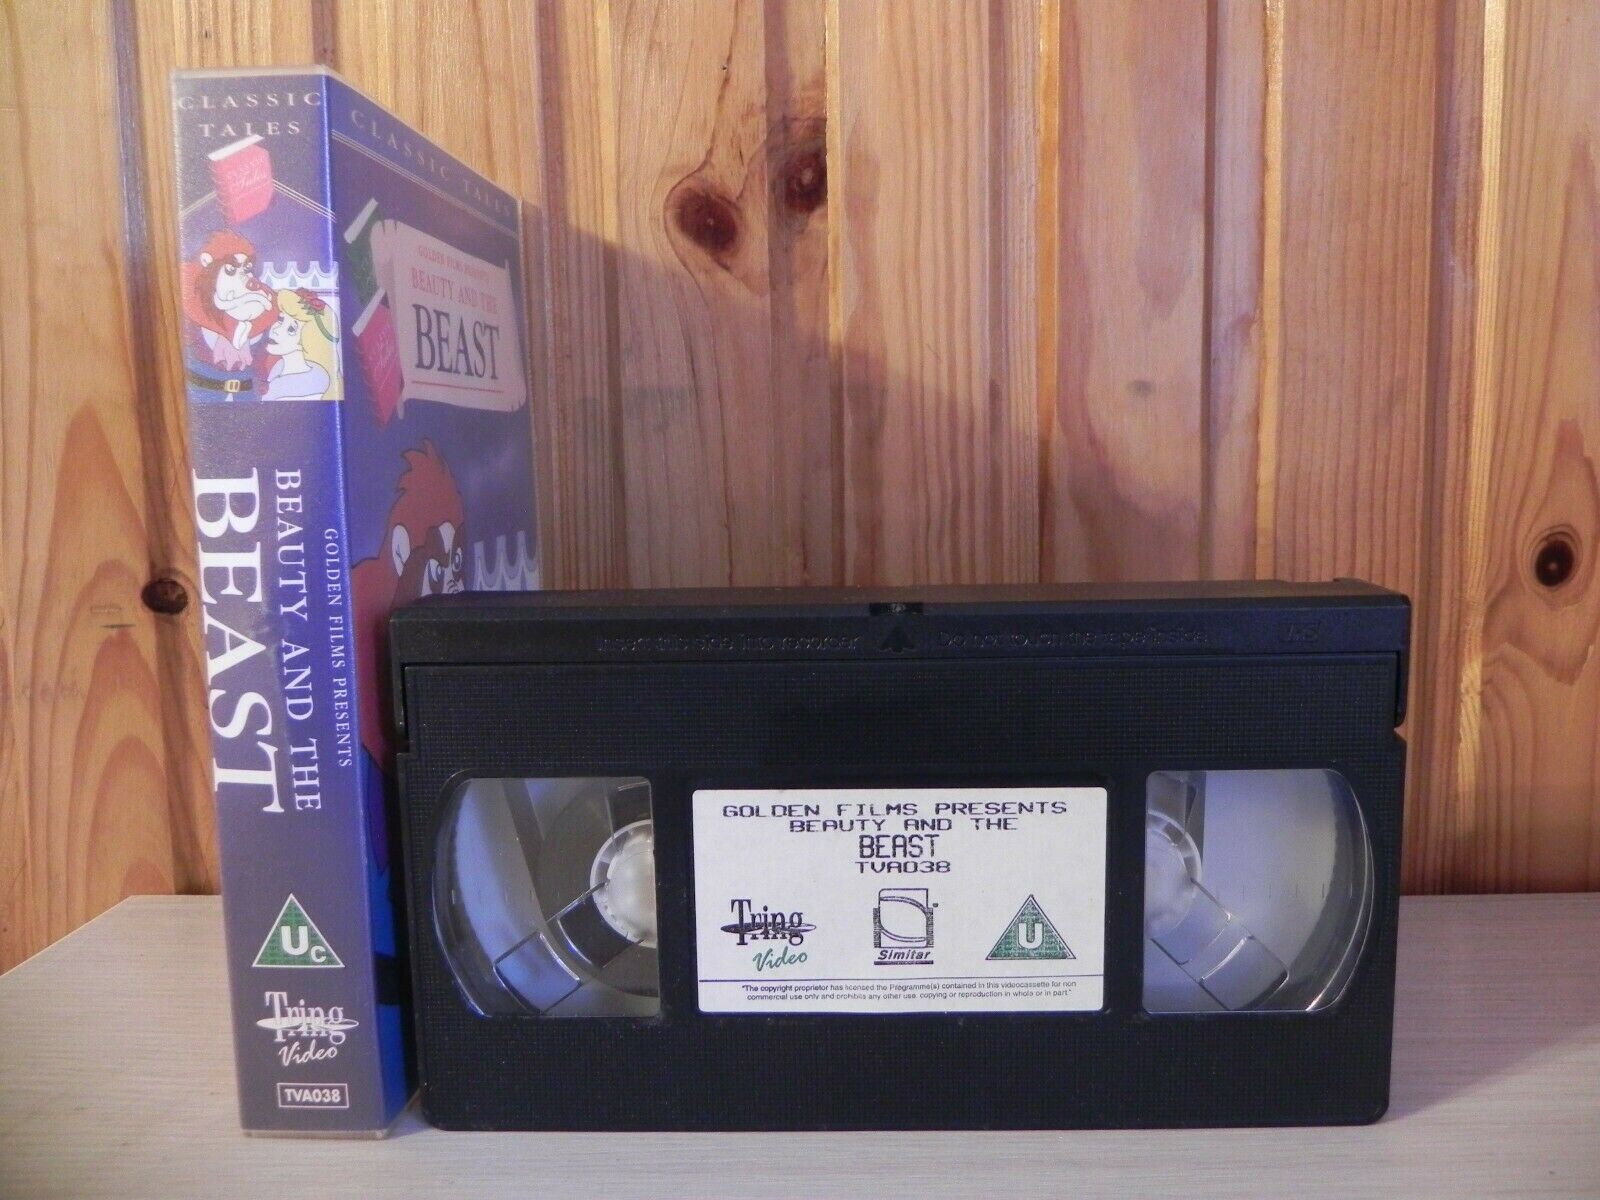 Beauty And The Beast: By Jakob Grimm - Animated Classic Tale - Kids - Pal VHS-